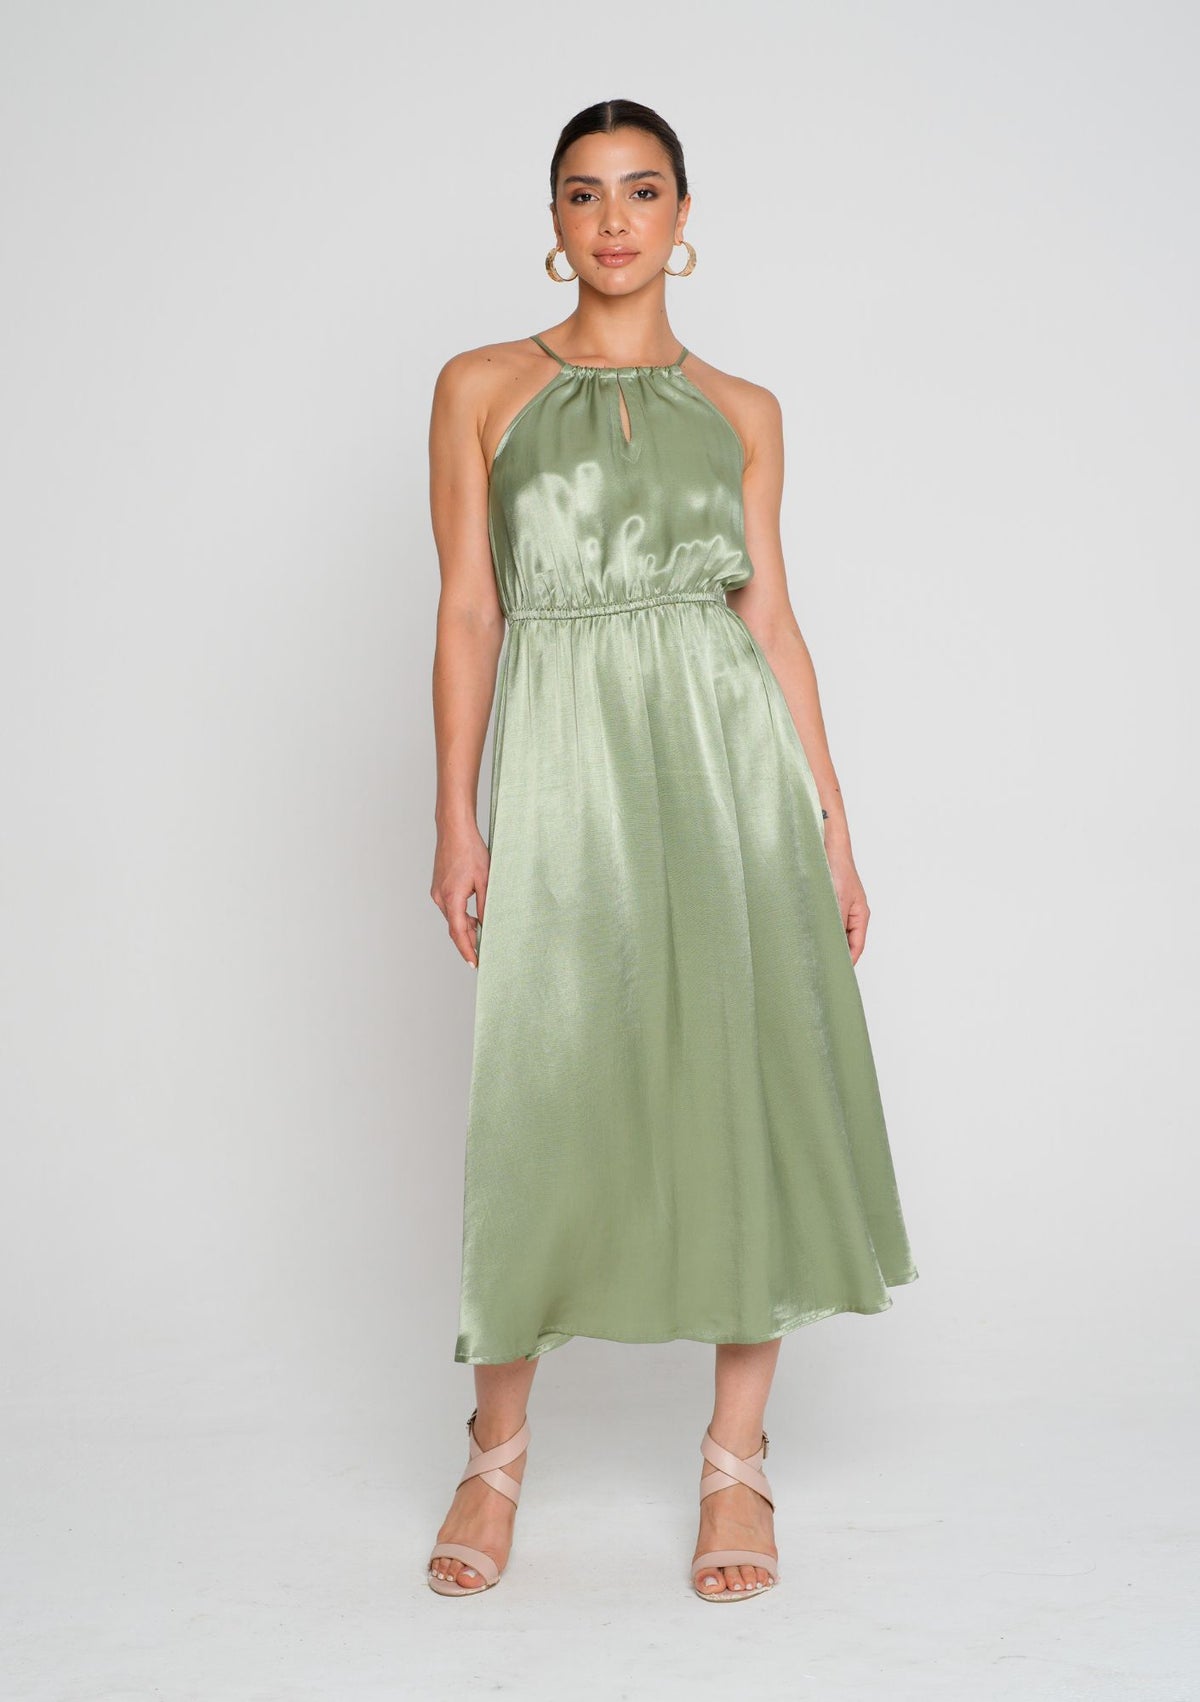 Tokyo Dress - Photographed in Emerald Green Satin